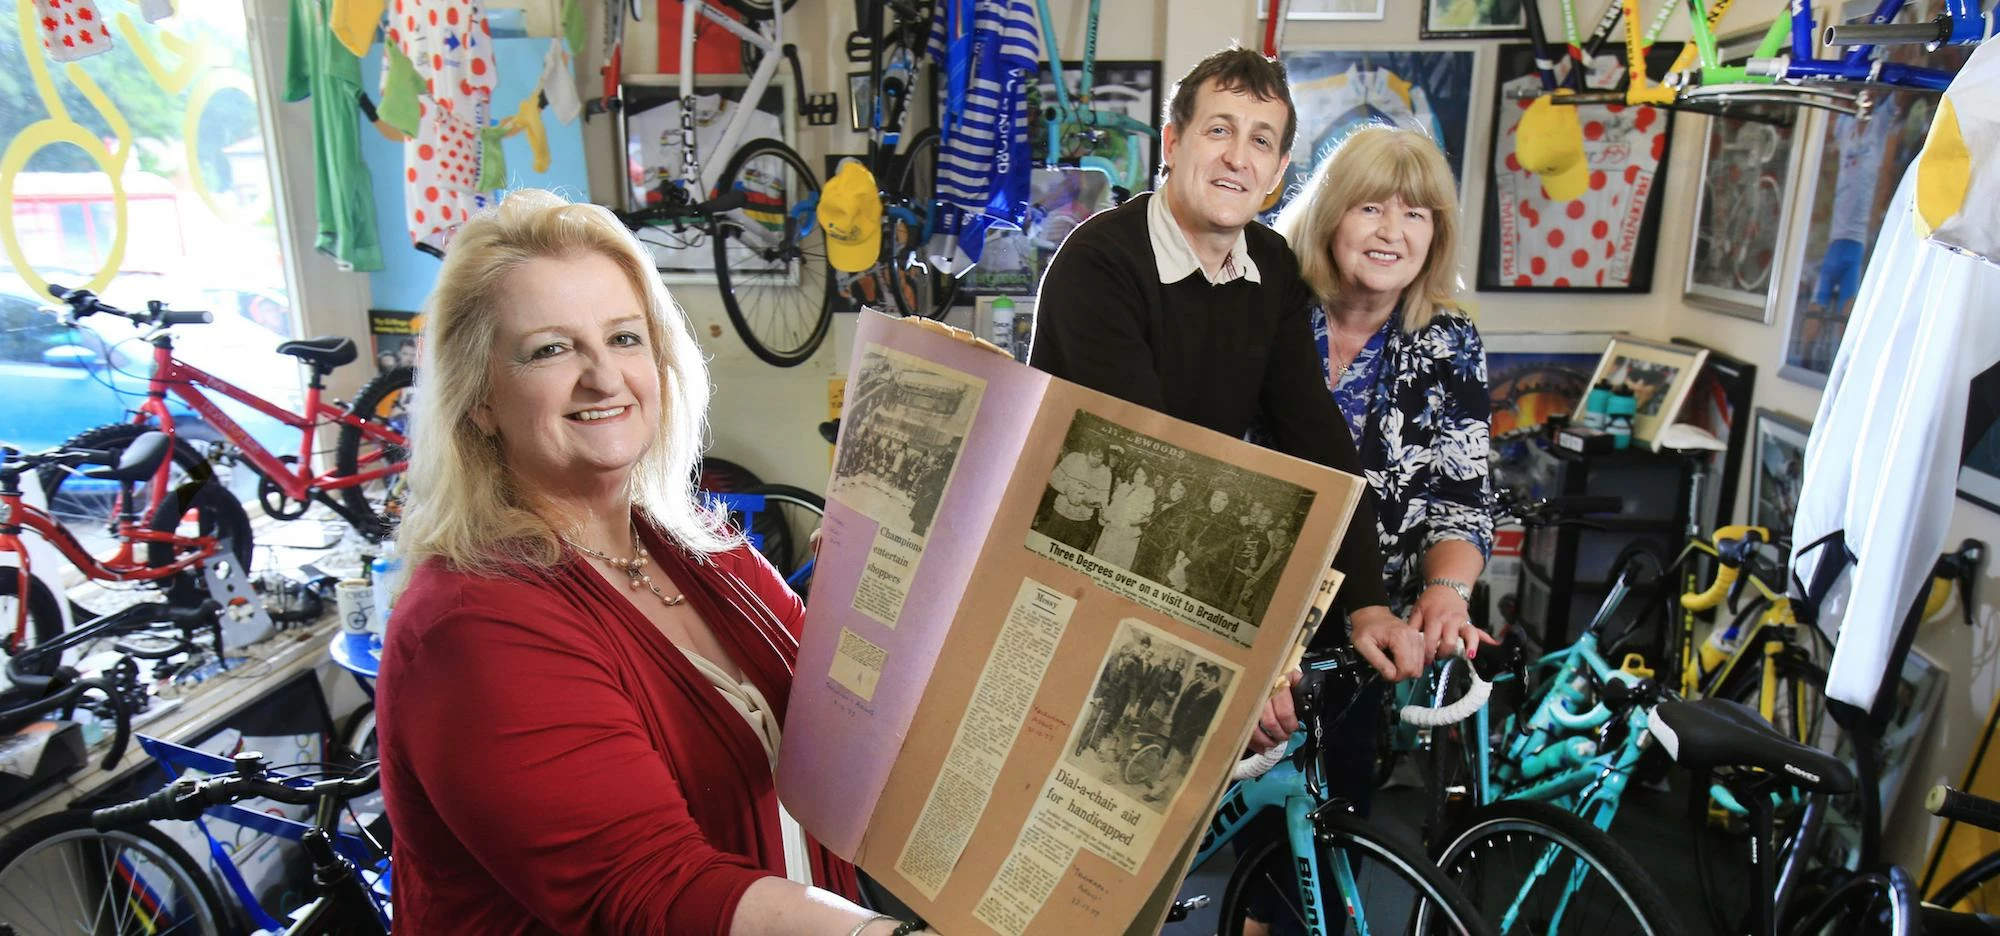 Catherine Riley and Pennine Cycles Sandra Corcoran with her husband Paul share memories of Kirkgate 